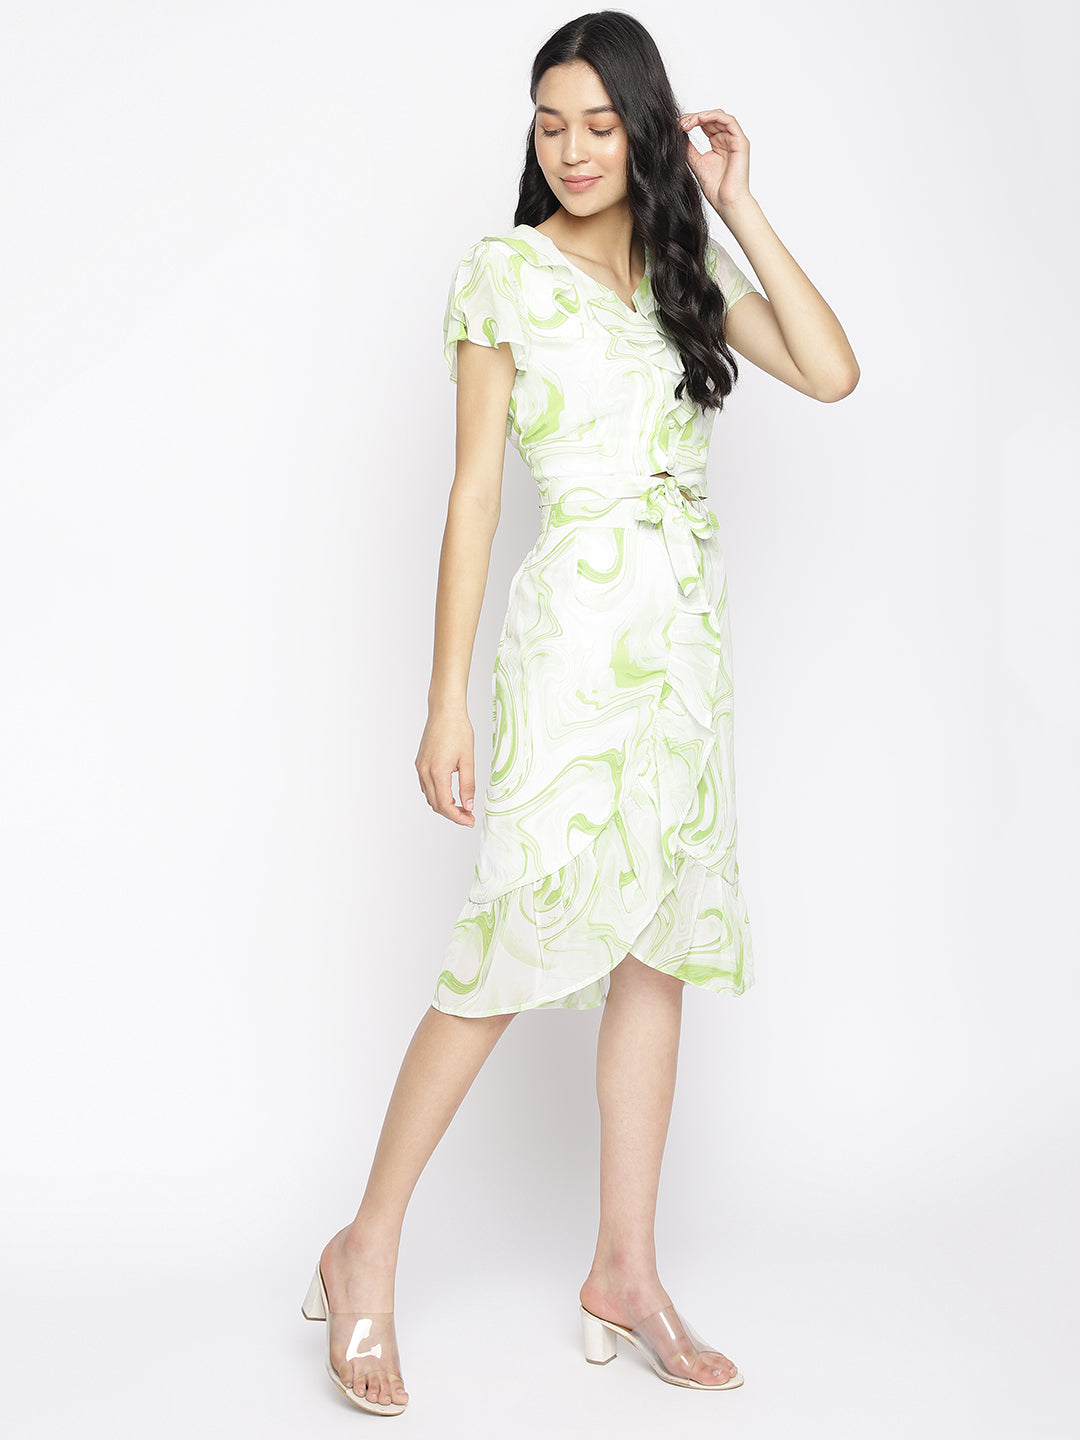 Green Cap Sleeve With Cordset Dress